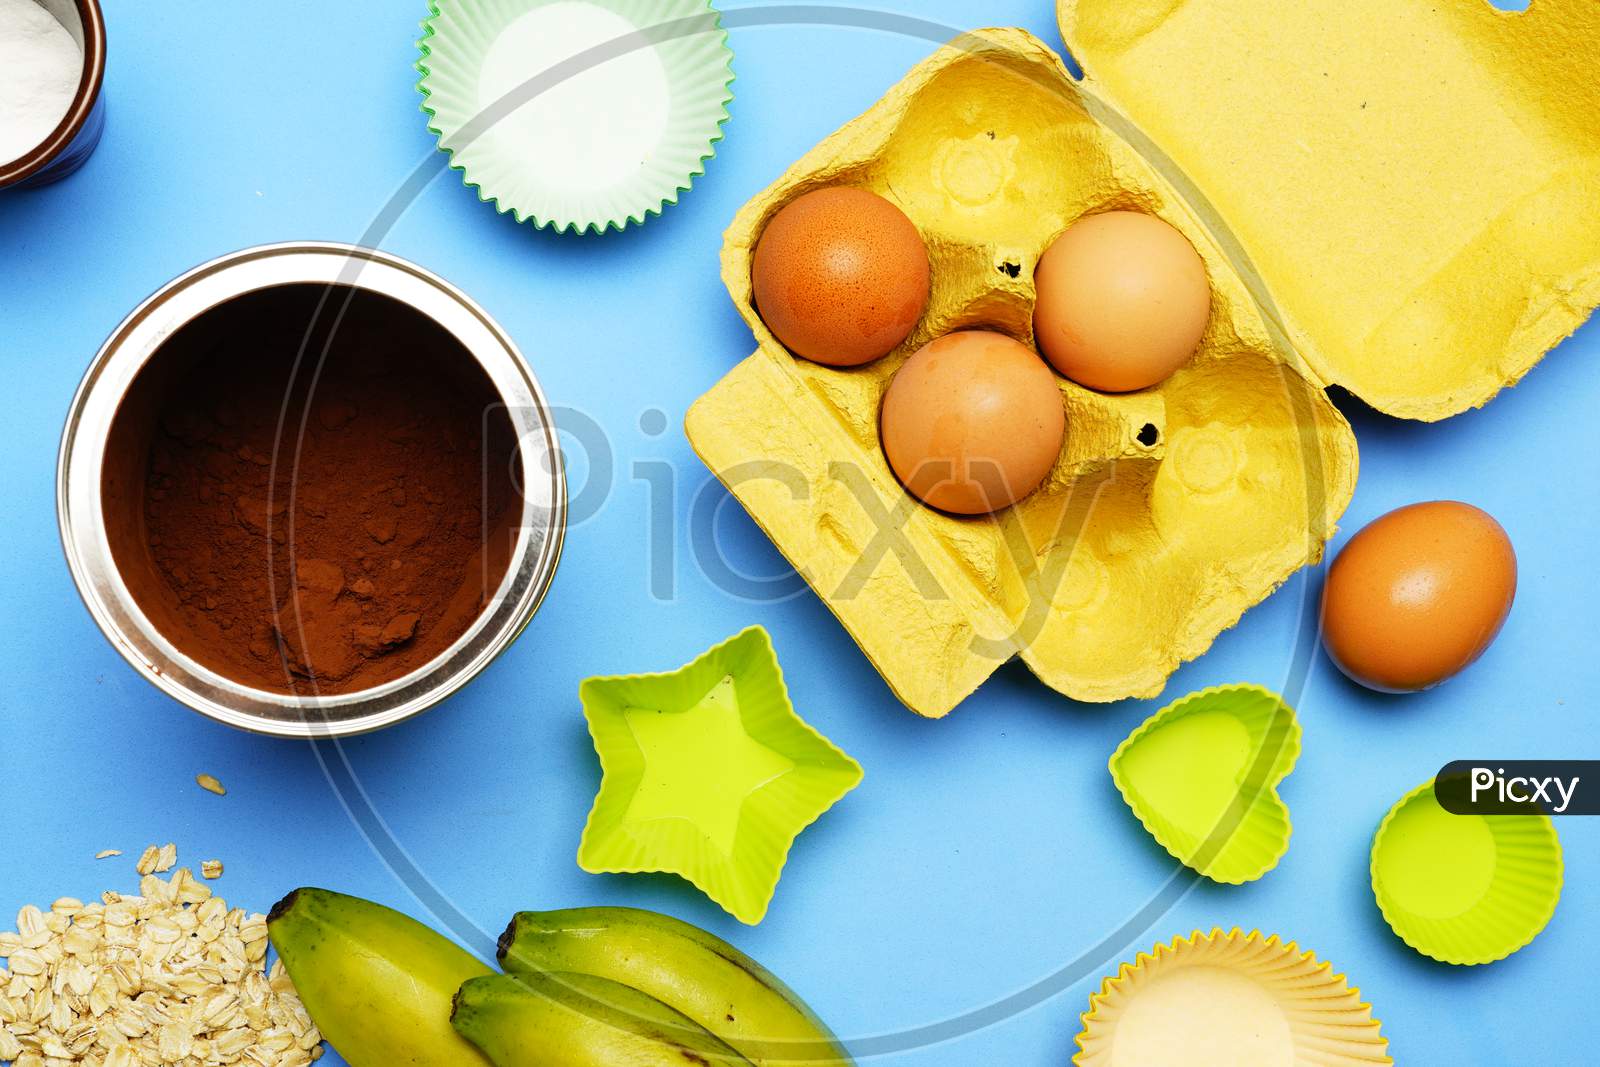 Top View Of Ingredients To Make A Cake With Pastry Mold And Muffins. Flat Lay Flat Design